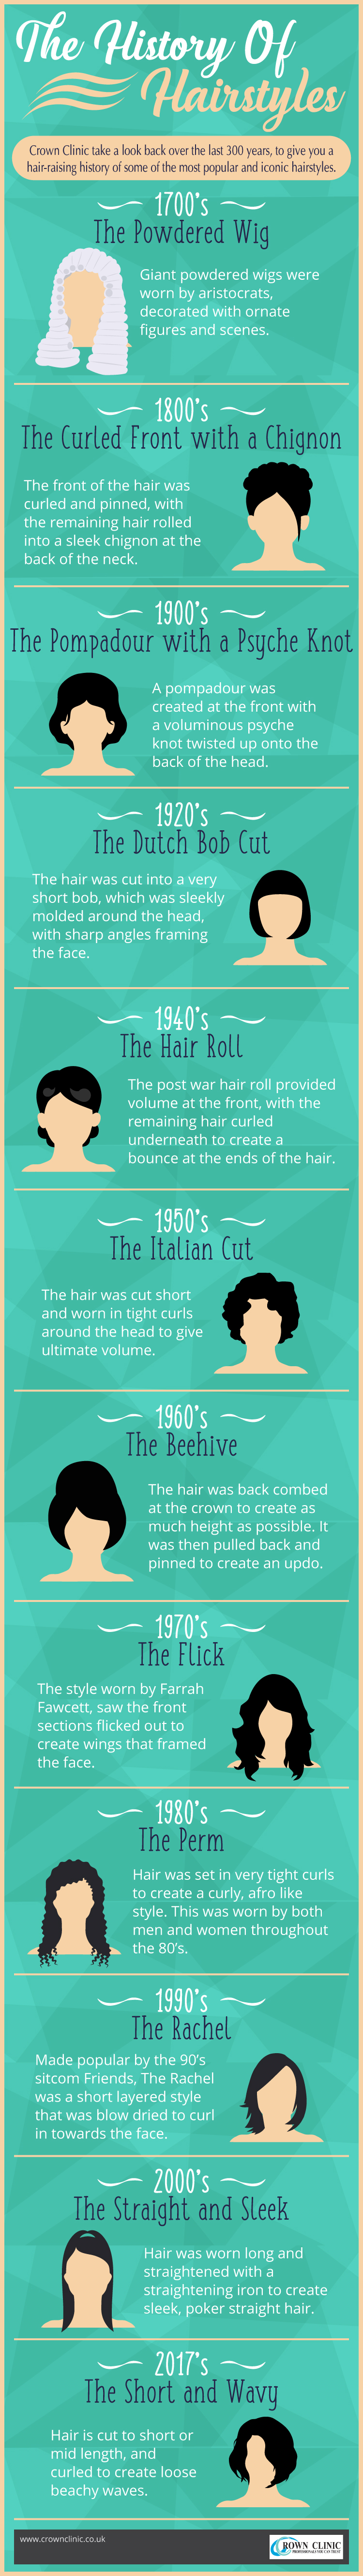 300 Years Of Hairstyles - infographic, hair style, fashion